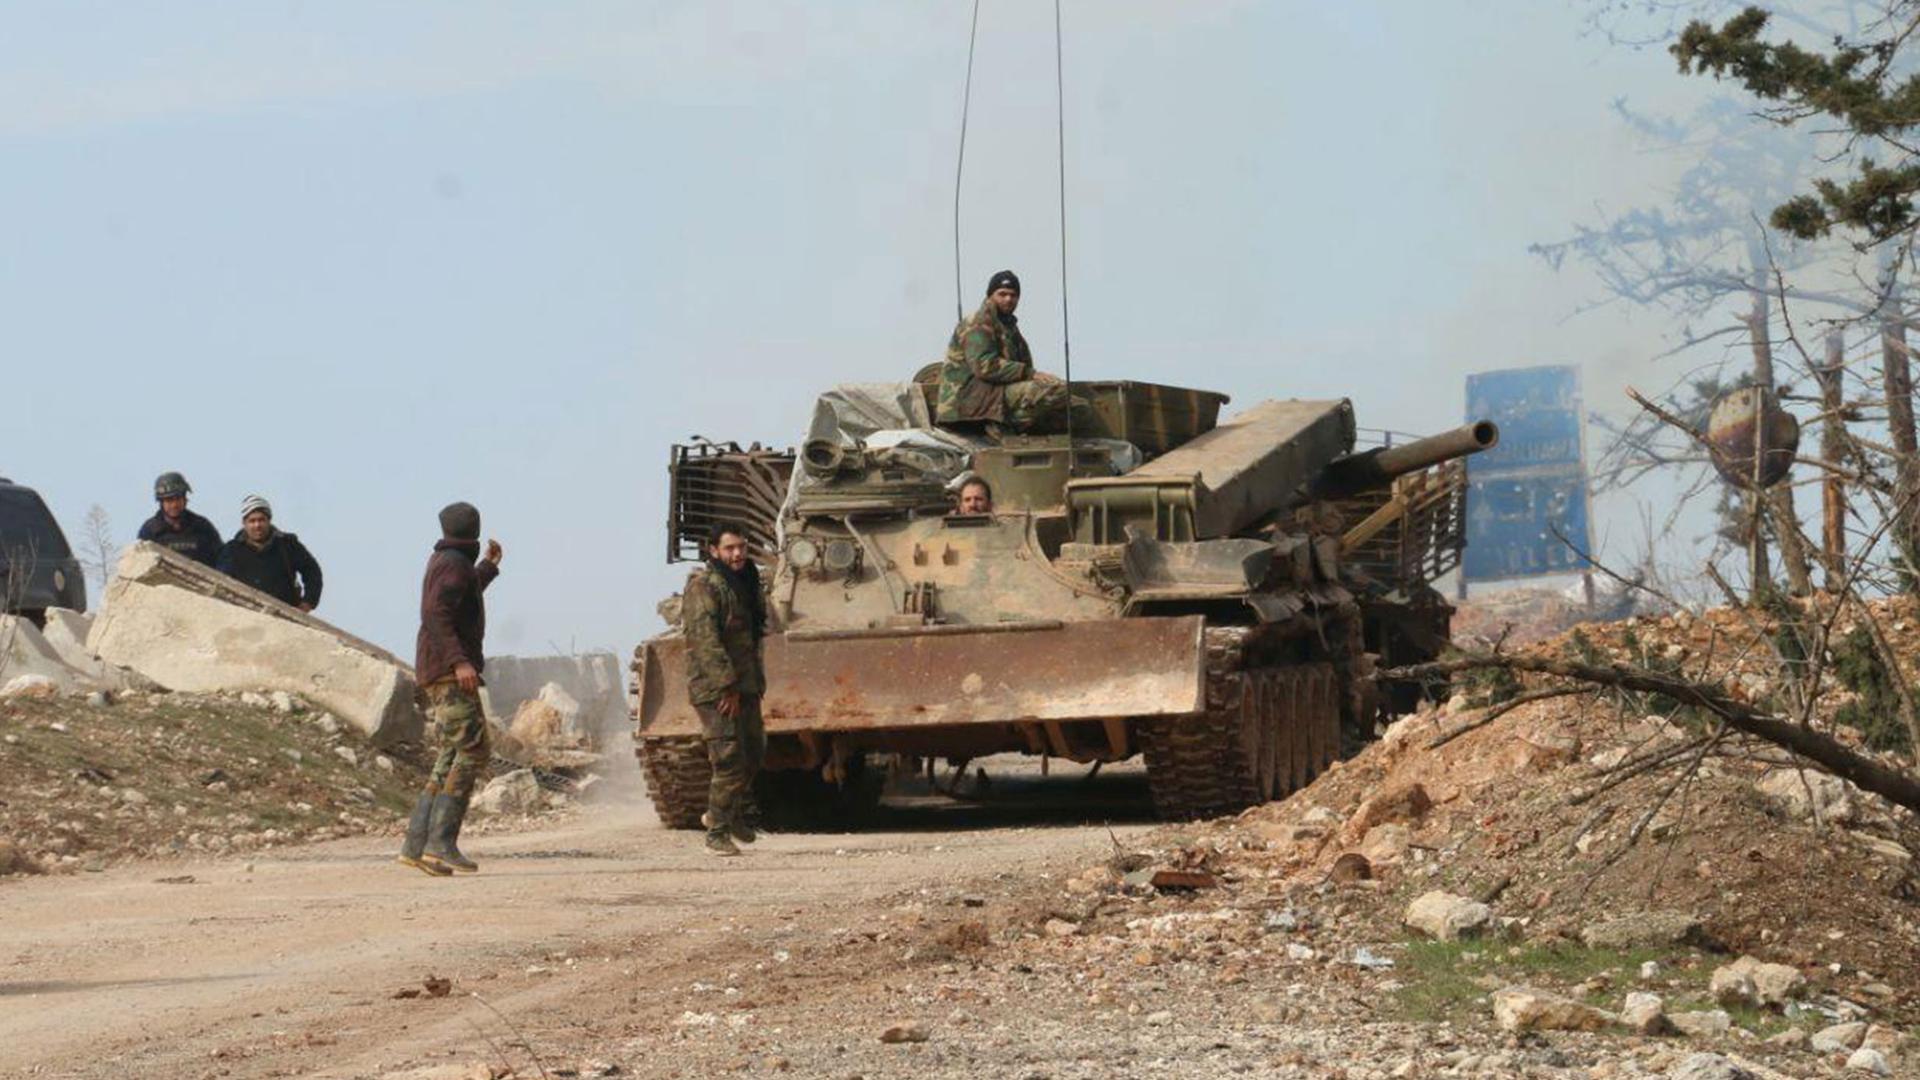 Several Syria soldiers are shown walking alongside and riding on a tank in a dirt road.